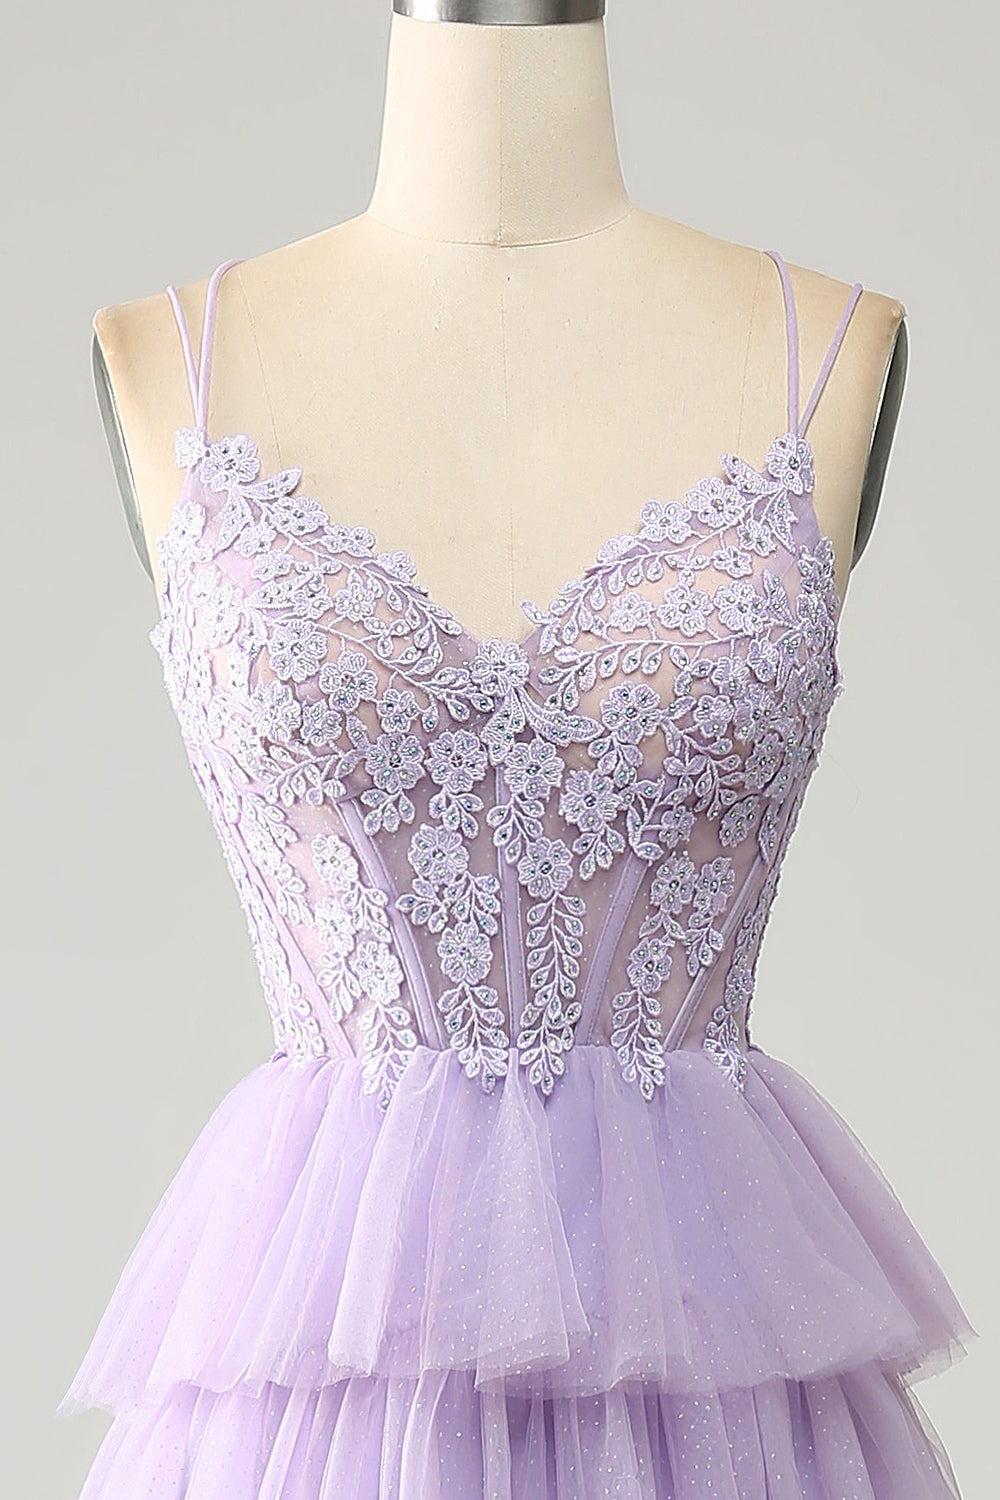 Zapakasa Women Lilac Tulle Tiered Princess Corset Prom Dress with Appliques  A Line Evening Party Dress